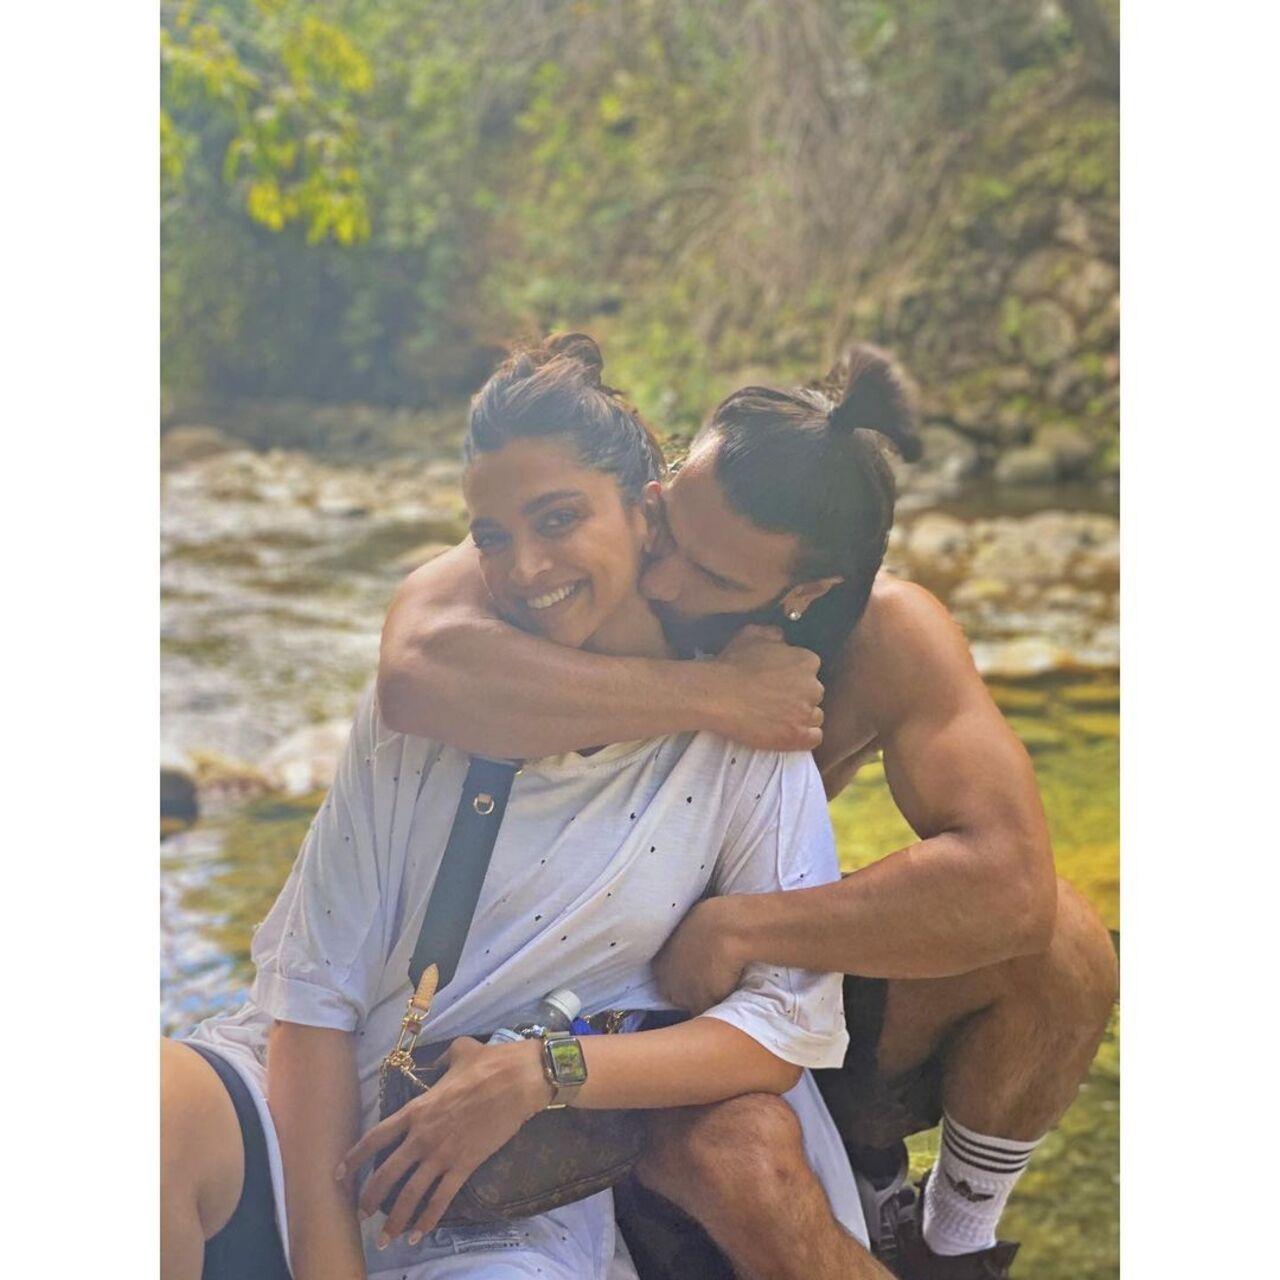 In the midst of nature, Ranveer and Deepika embrace their love for each other with a back hug